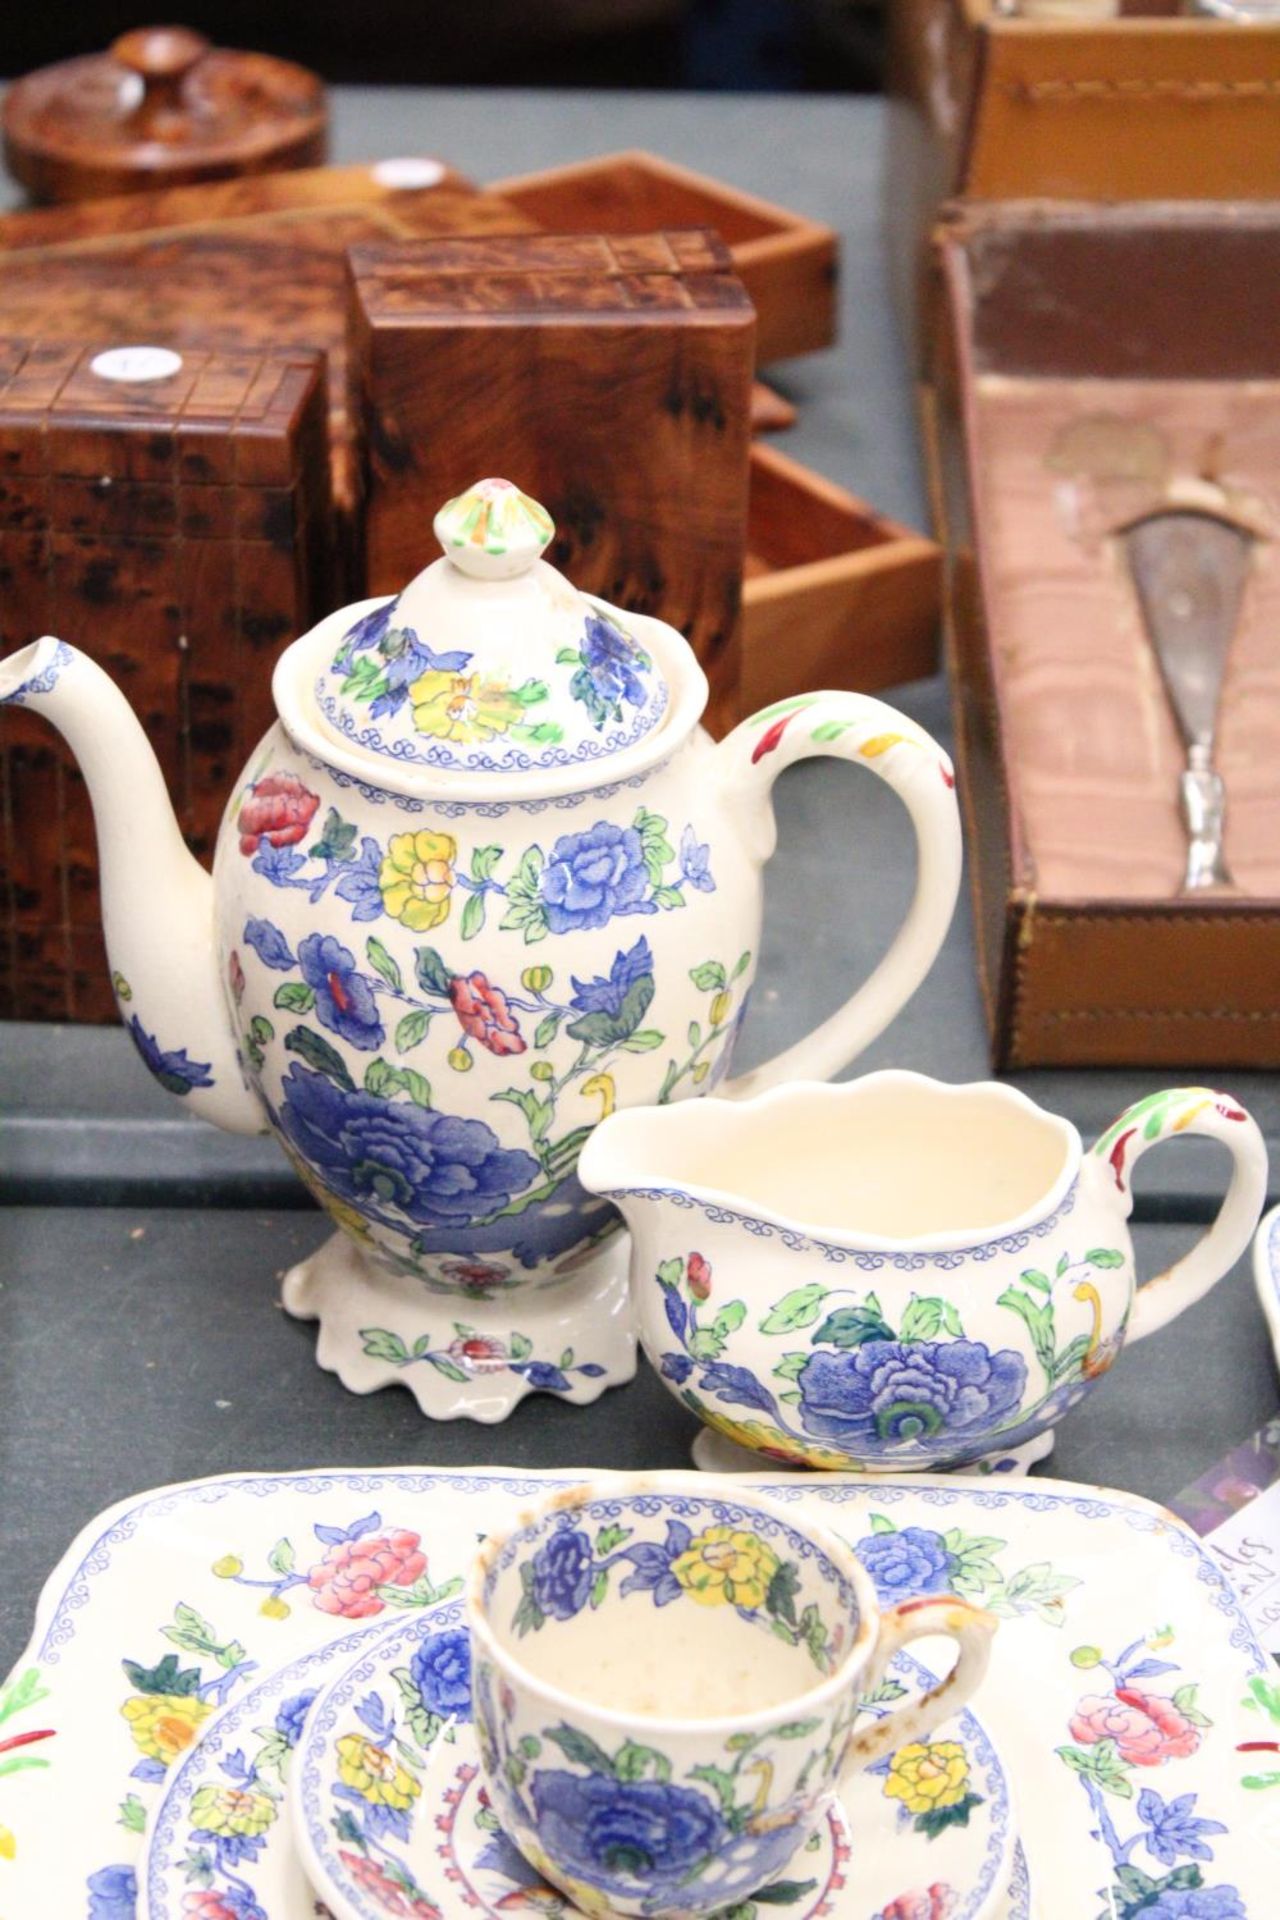 A QUANTITY OF MASONS "REGENCY" WARE TO INCLUDE A TEAPOT, CUPS, SAUCERS, PLATES ETC - Image 4 of 5